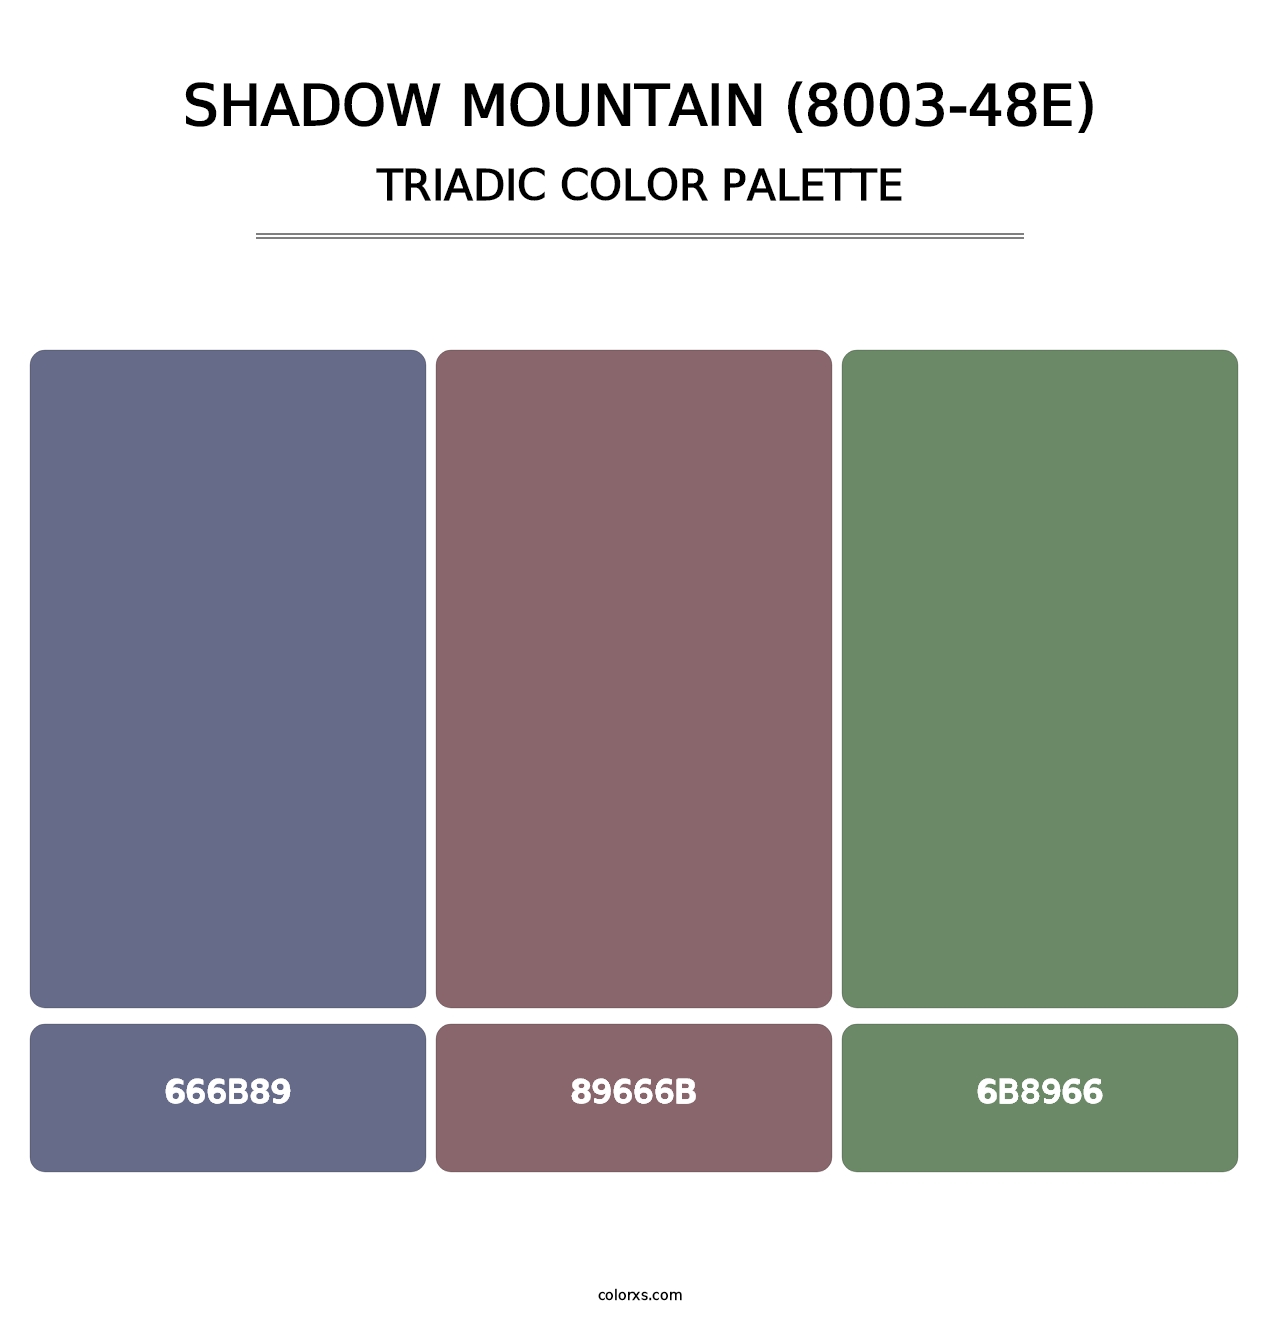 Shadow Mountain (8003-48E) - Triadic Color Palette